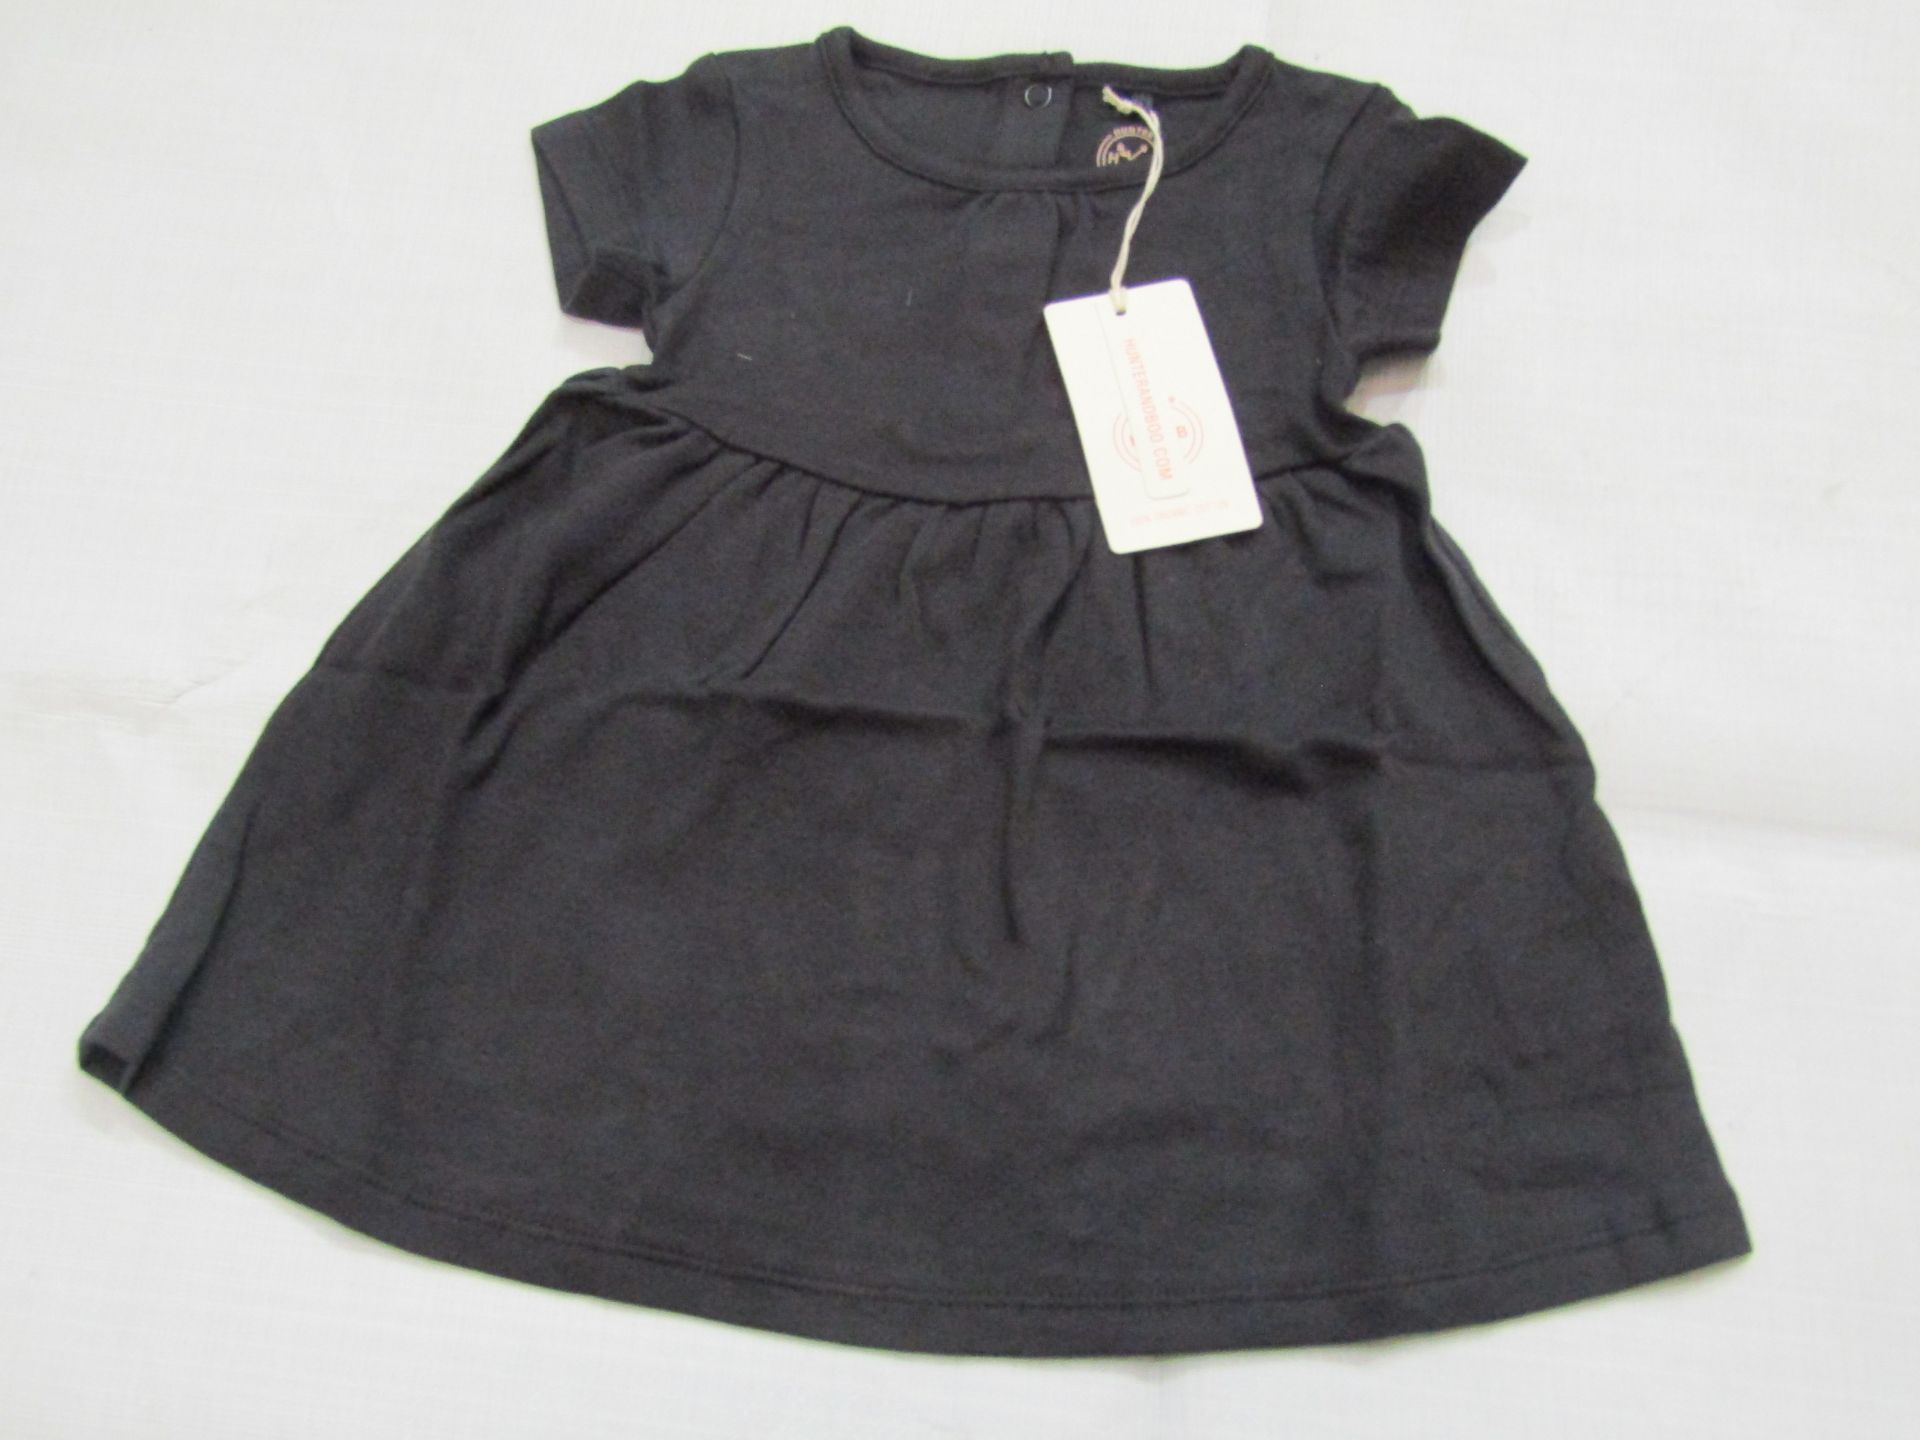 Hunter & Boo Dress Black Aged 6-12 Months New & Packaged RRP £21